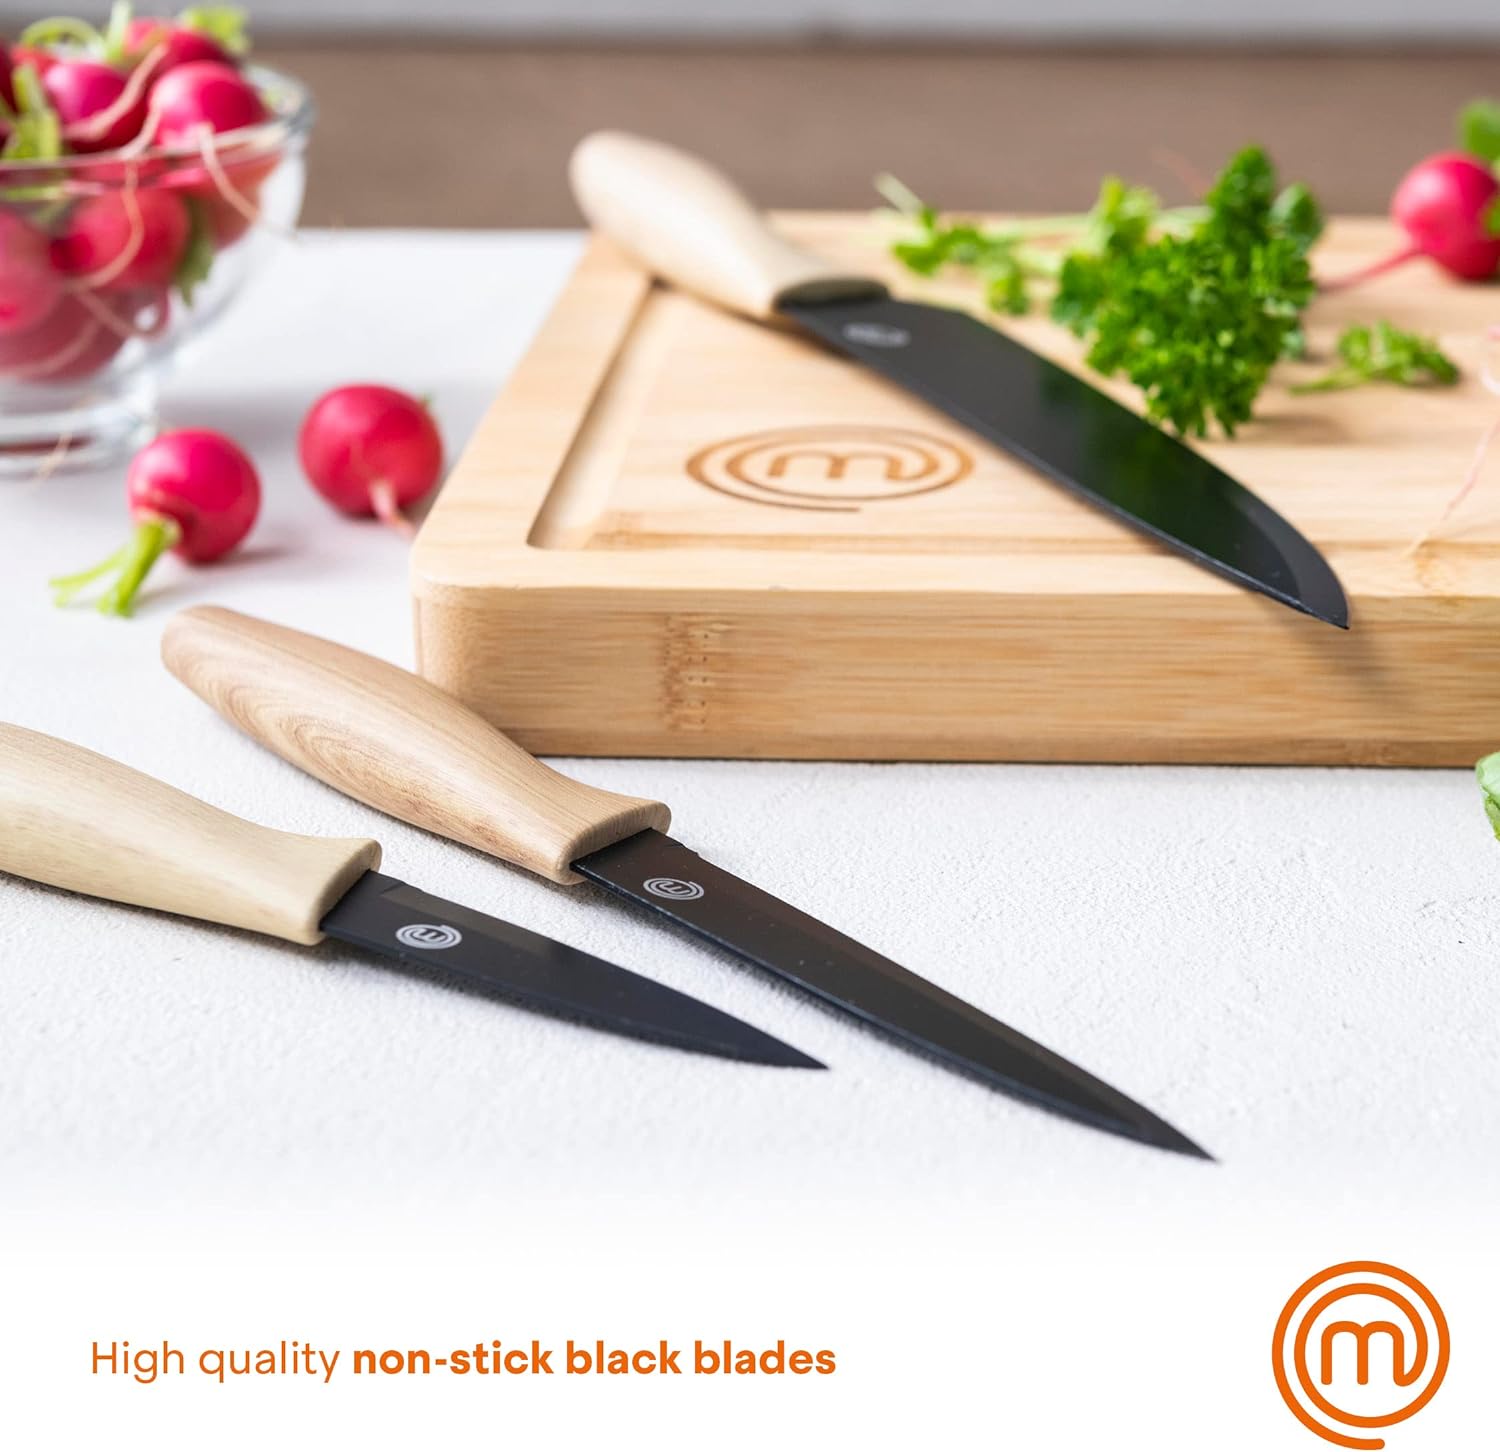 MasterChef Knife Set of 5 Kitchen Knives for Cooking with Non Stick Blades & Soft Touch Handles